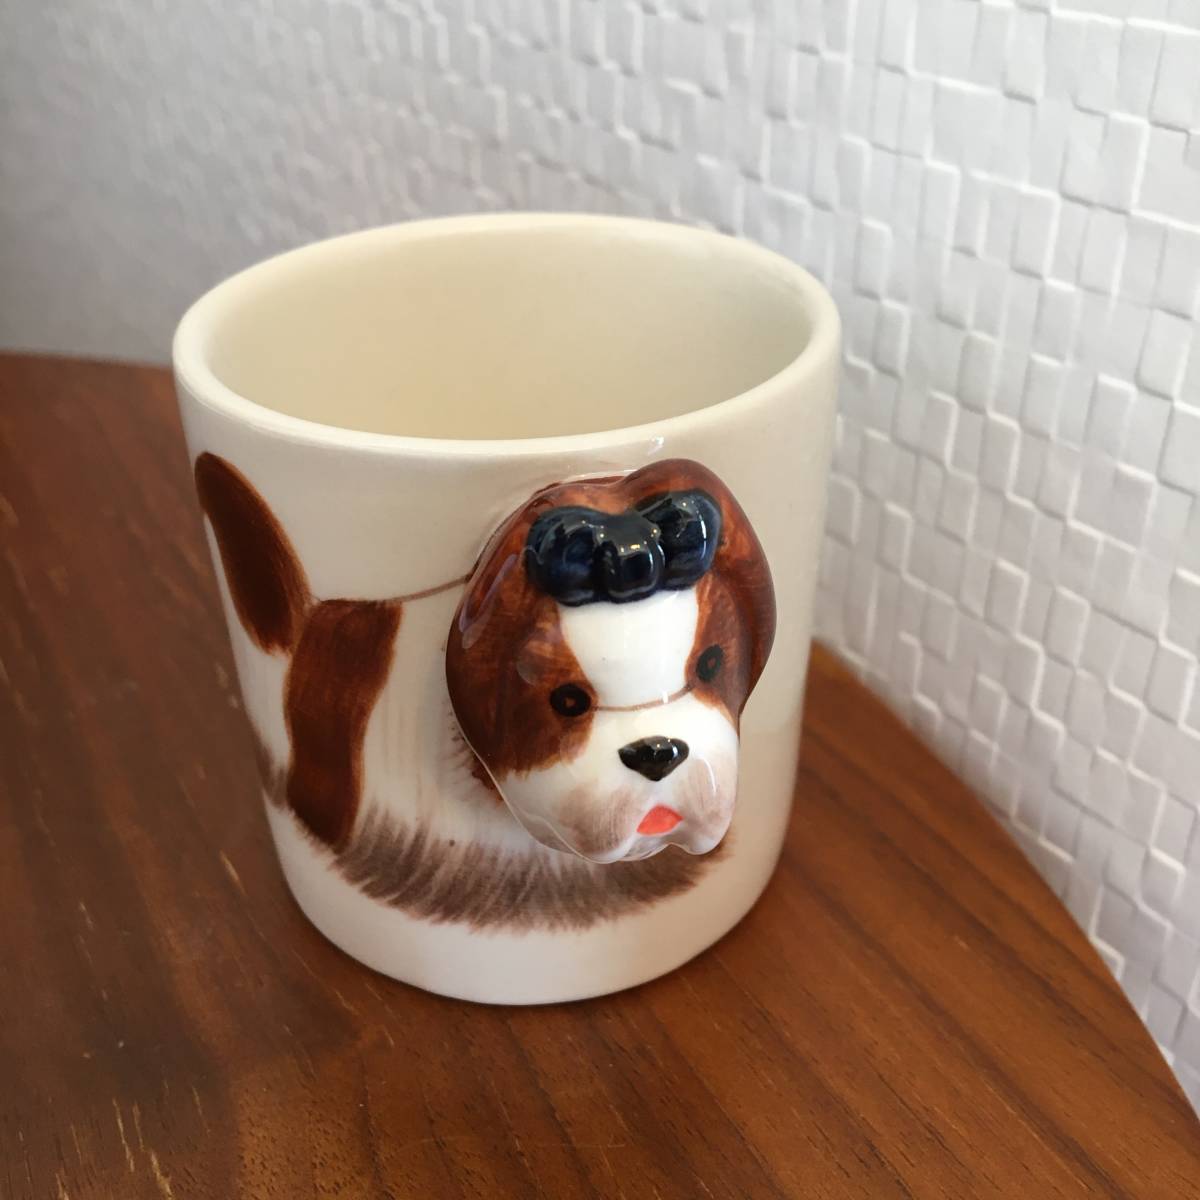  She's -l cup & saucer set animal 3D solid collection hand made gift ceramics dog coffee CUP Espresso ( new goods )( prompt decision )